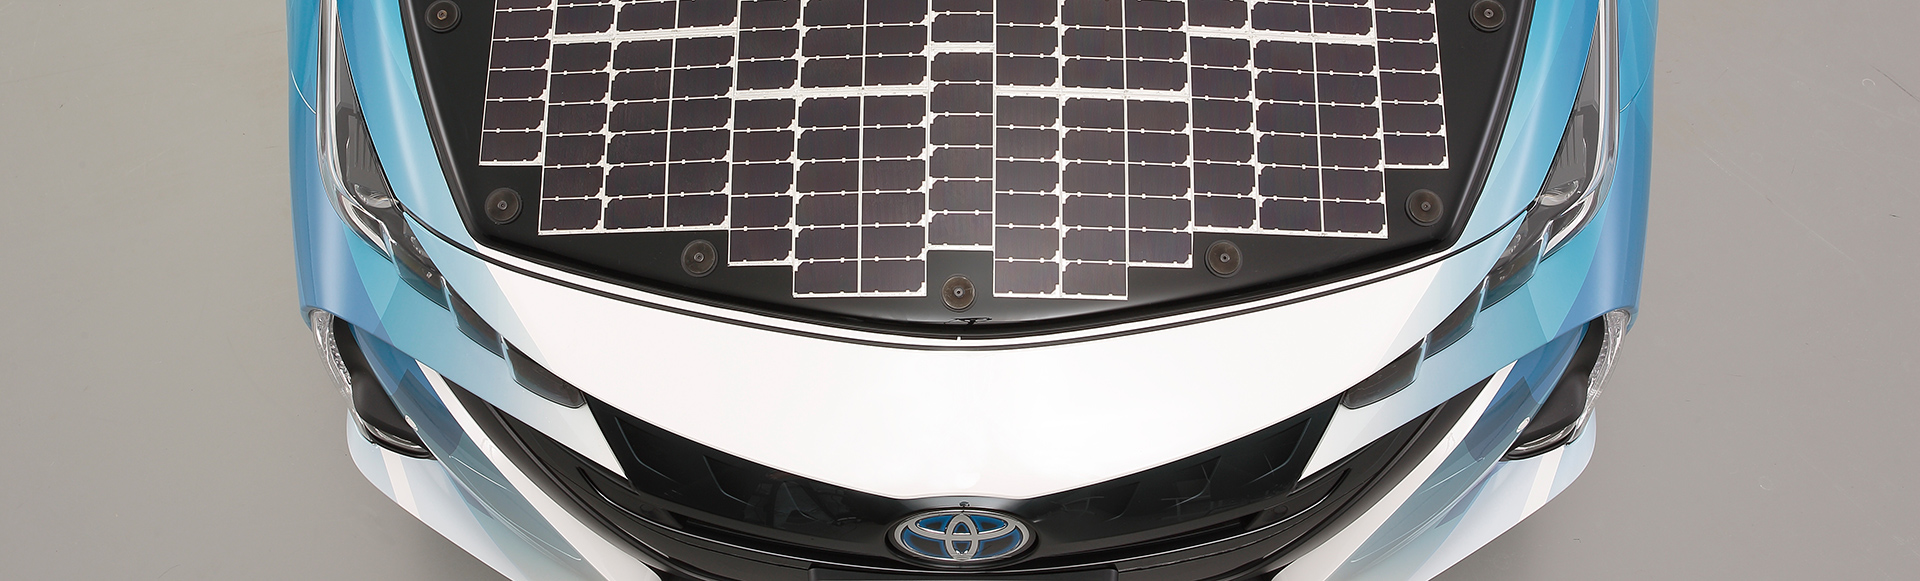 NEDO, Sharp, and Toyota to Begin Public Road Trials of Electrified Vehicles Equipped with High-efficiency Solar Batteries